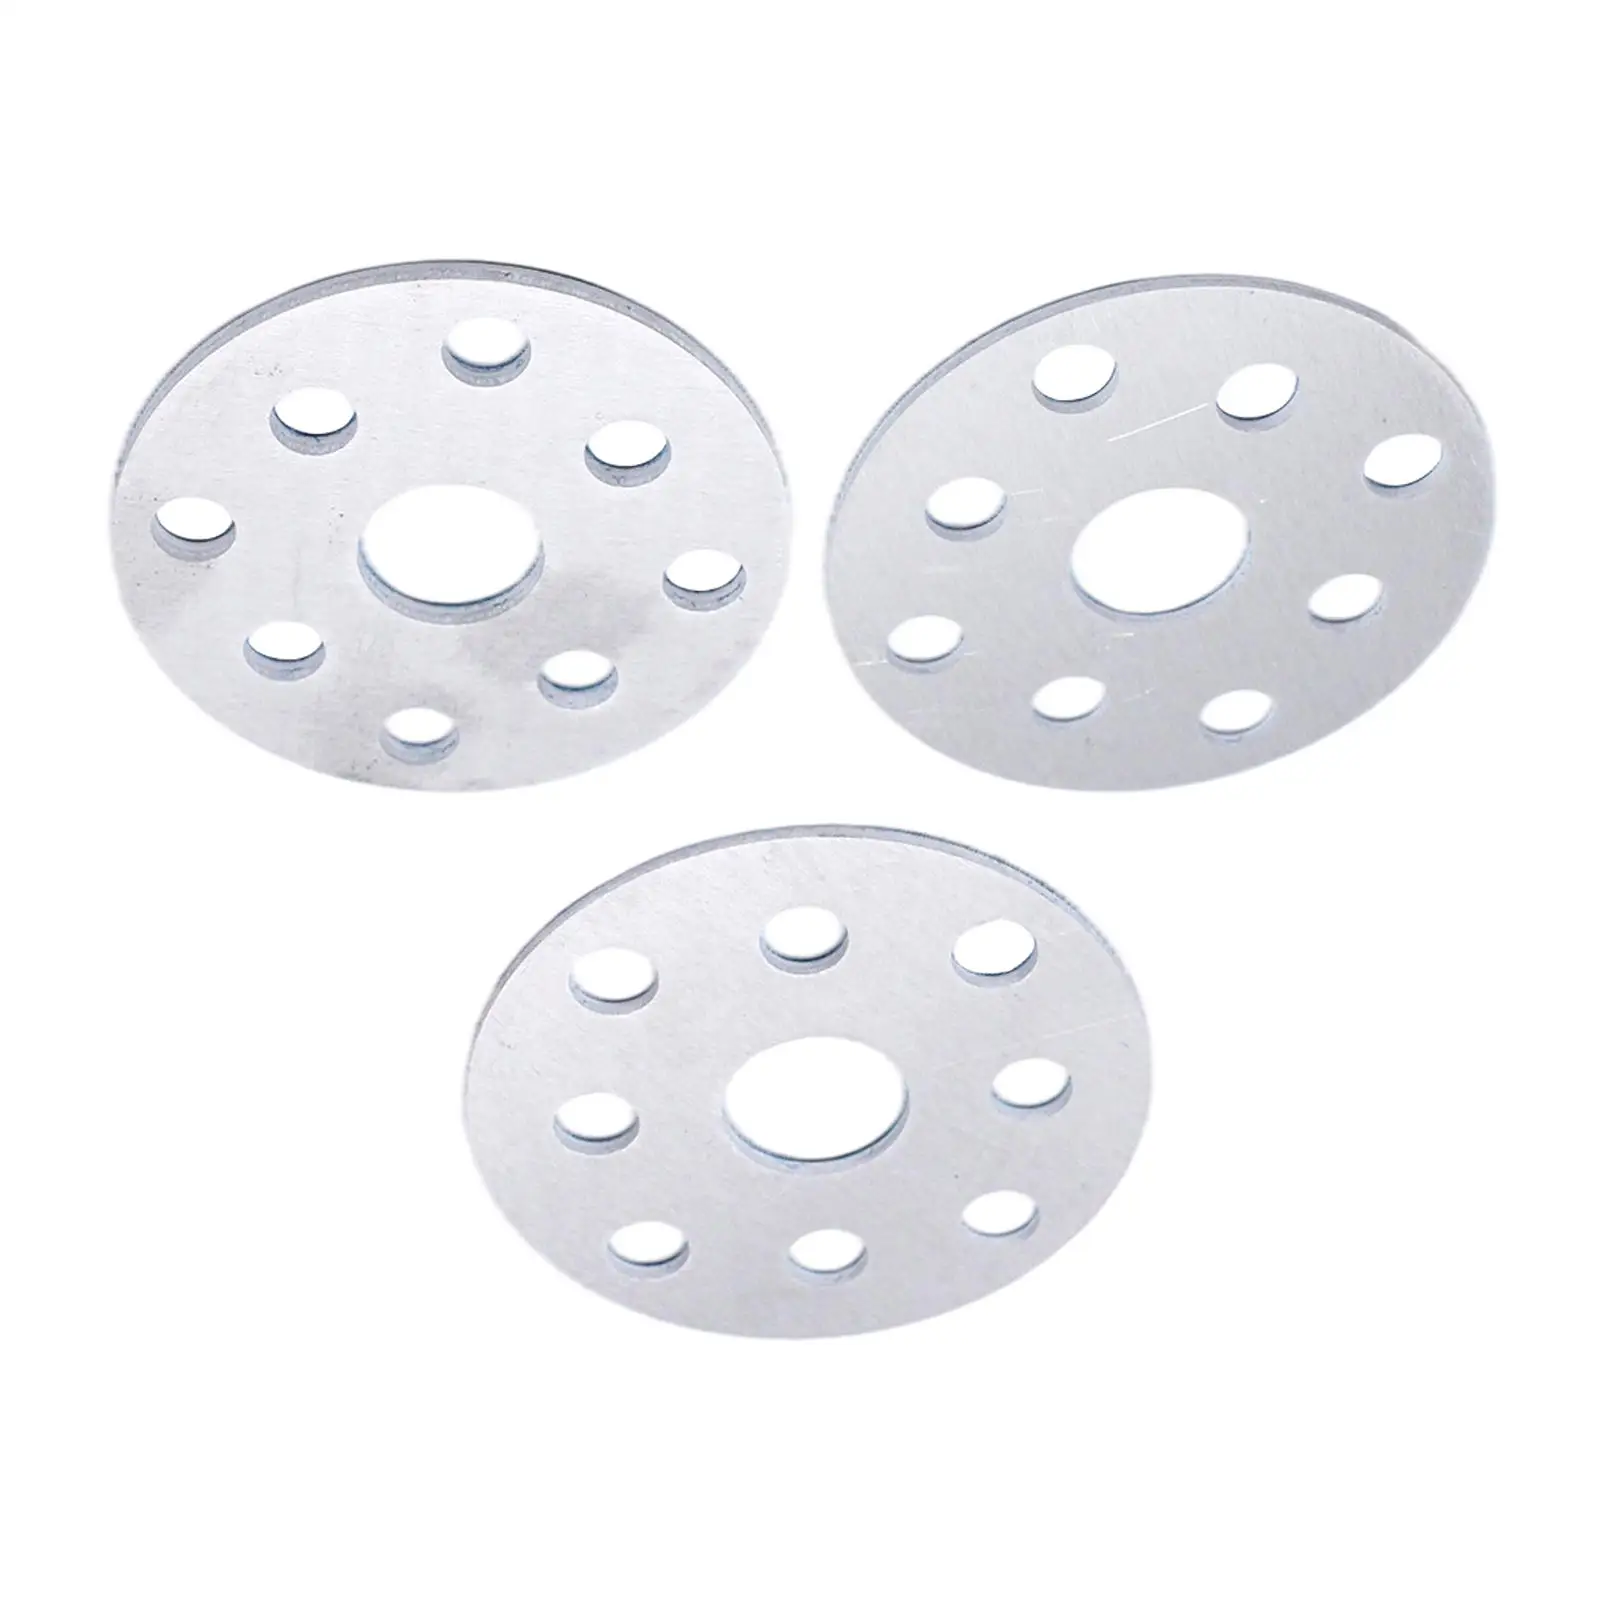 3Pcs Water Pump Spacer Silver Metal Auto Parts Pulley Shim Kit Replacement for Ford 302 350 427 454 Pulley Fan Accessories